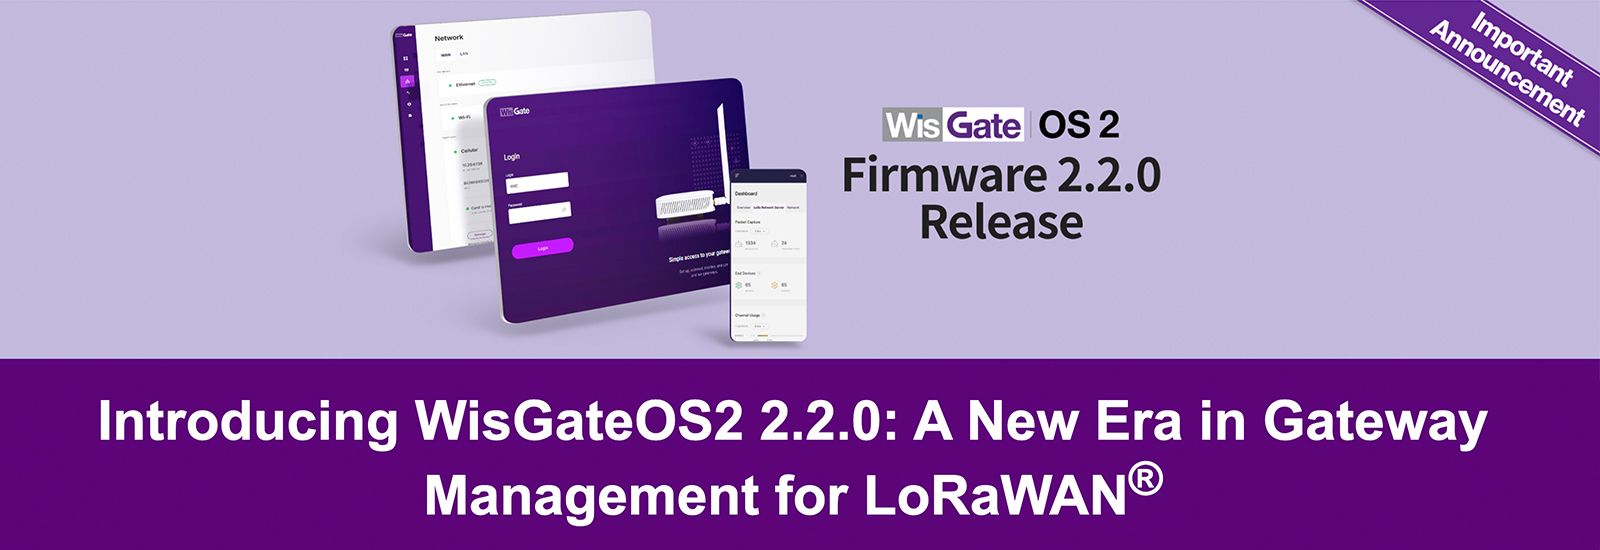 Introducing WisGateOS2 2.2.0: A New Era in Gateway Management for LoRaWAN®